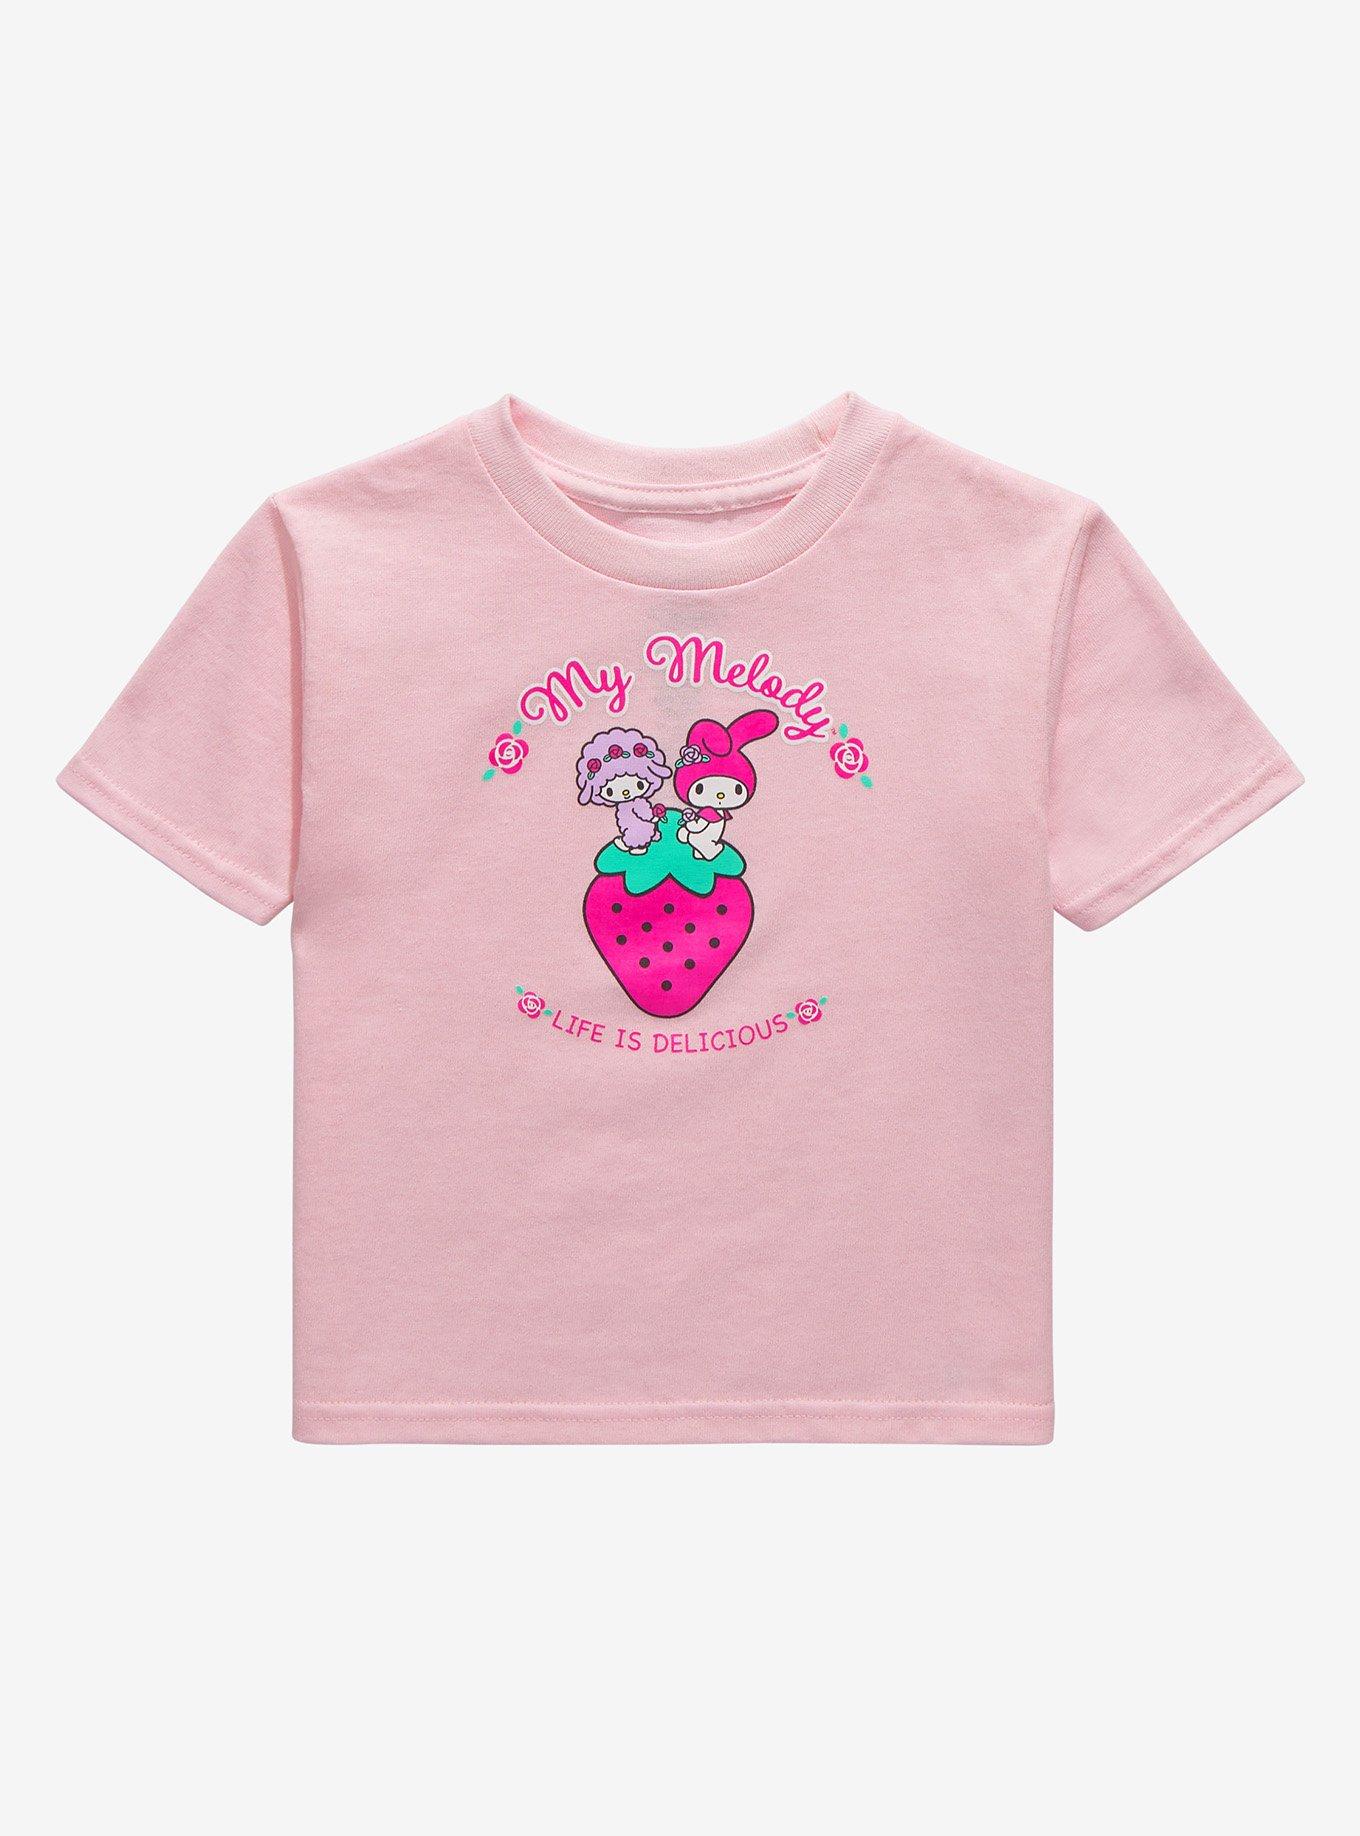 Sanrio My Melody & Life Delicious T-Shirt Sweet | BoxLunch Piano My is Exclusive Toddler BoxLunch 